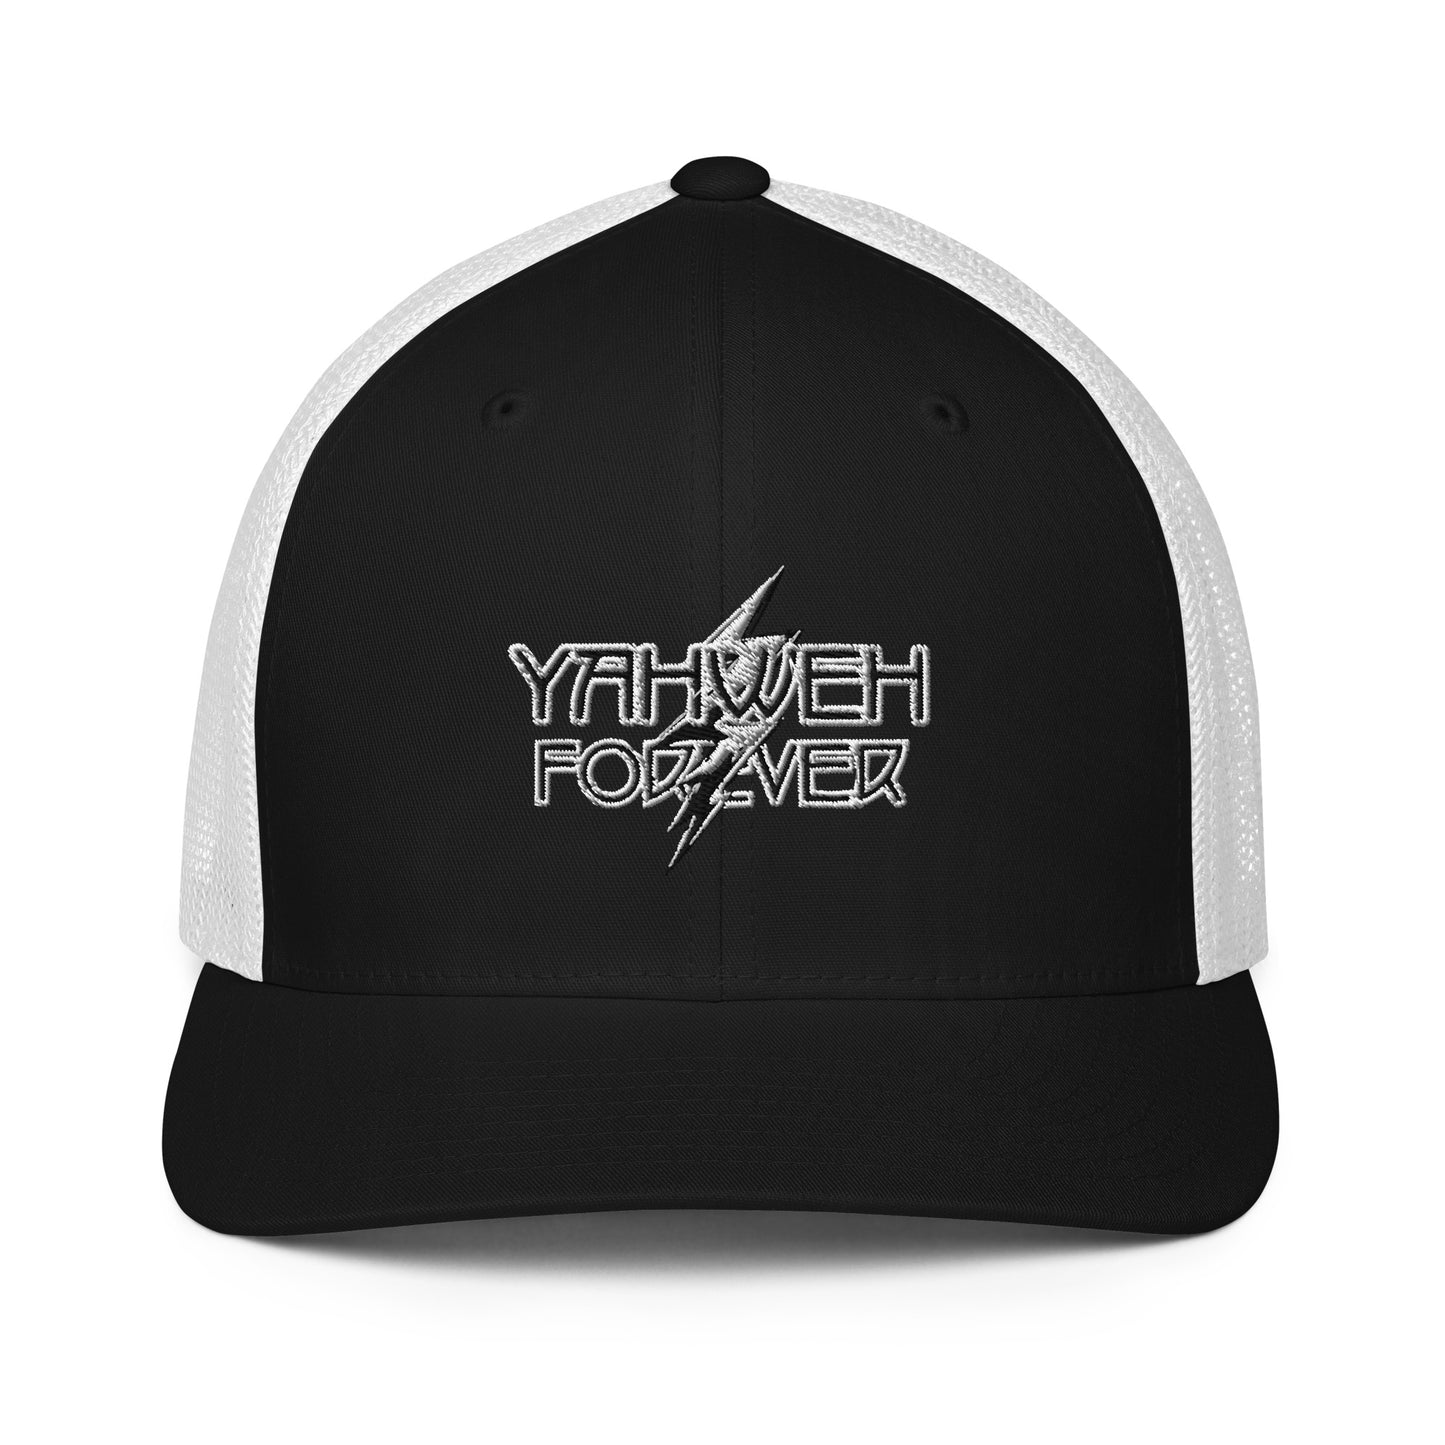 Yahweh Forever- Closed-back trucker cap